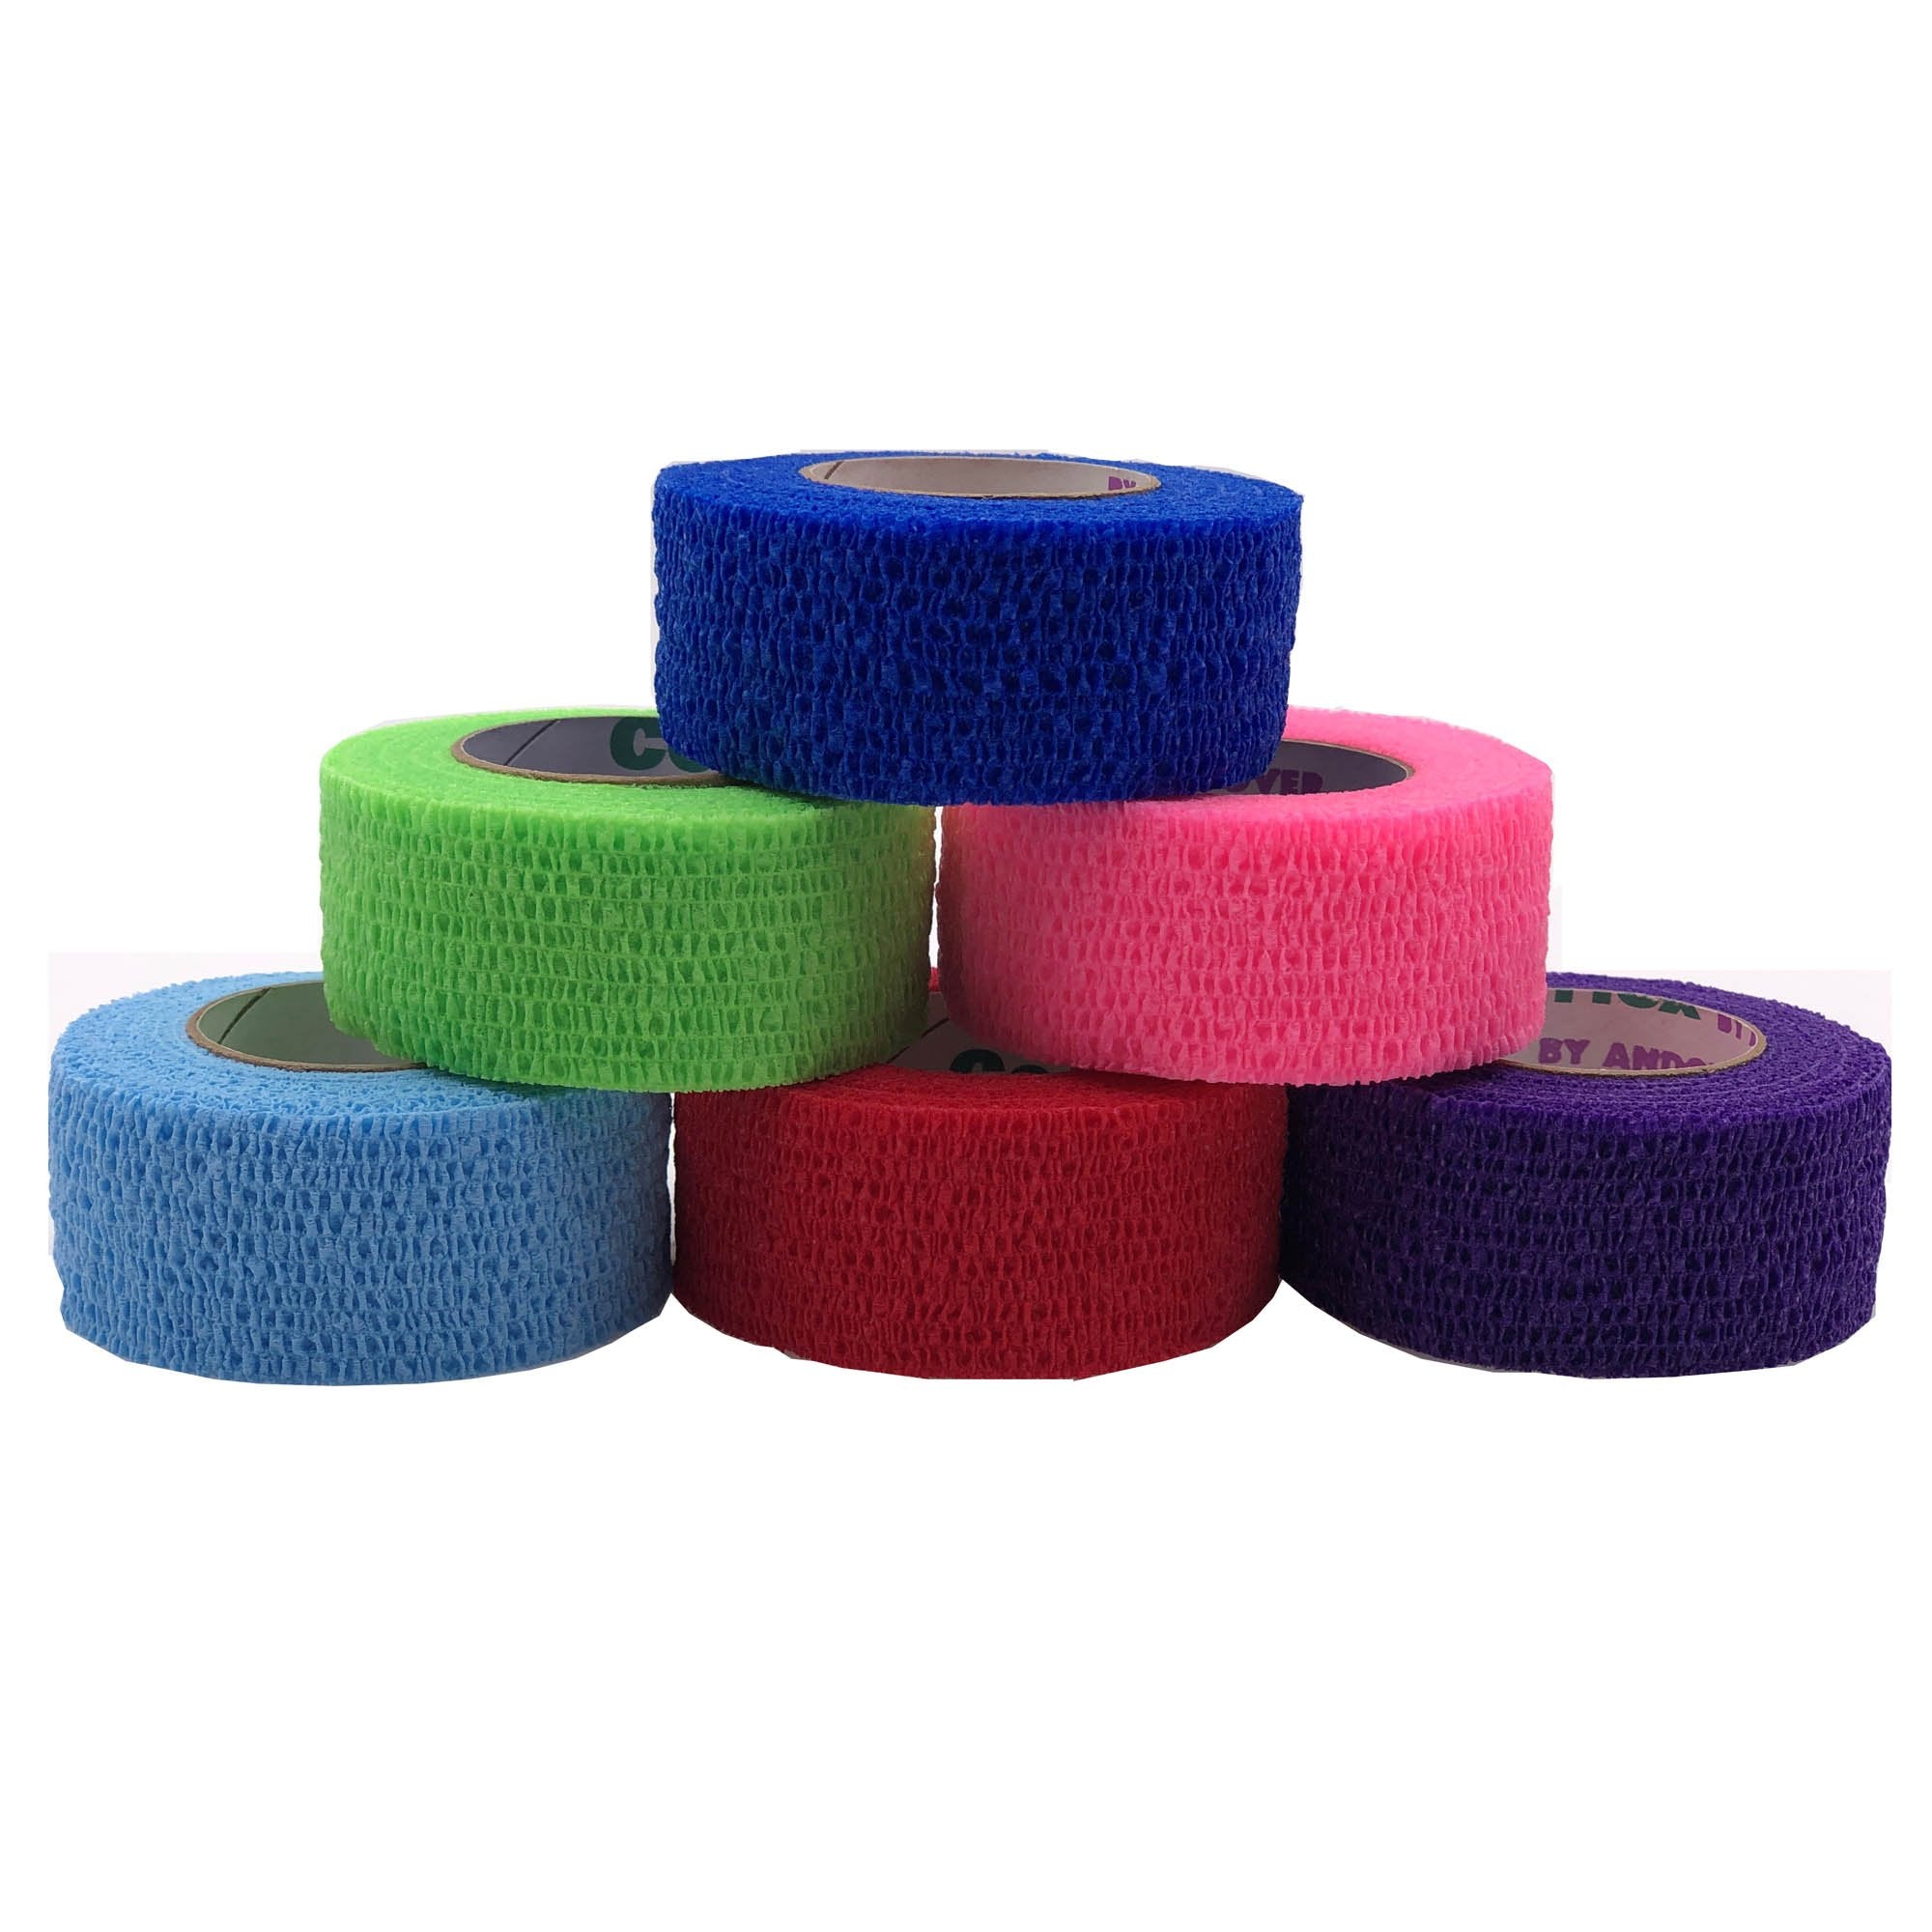 Cohesive Bandage Co-Flex®·Med 2 Inch X 5 Yard 16 lbs. Tensile Strength Self-adherent Closure Neon Pink / Blue / Purple / Light Blue / Neon Green / Red NonSterile